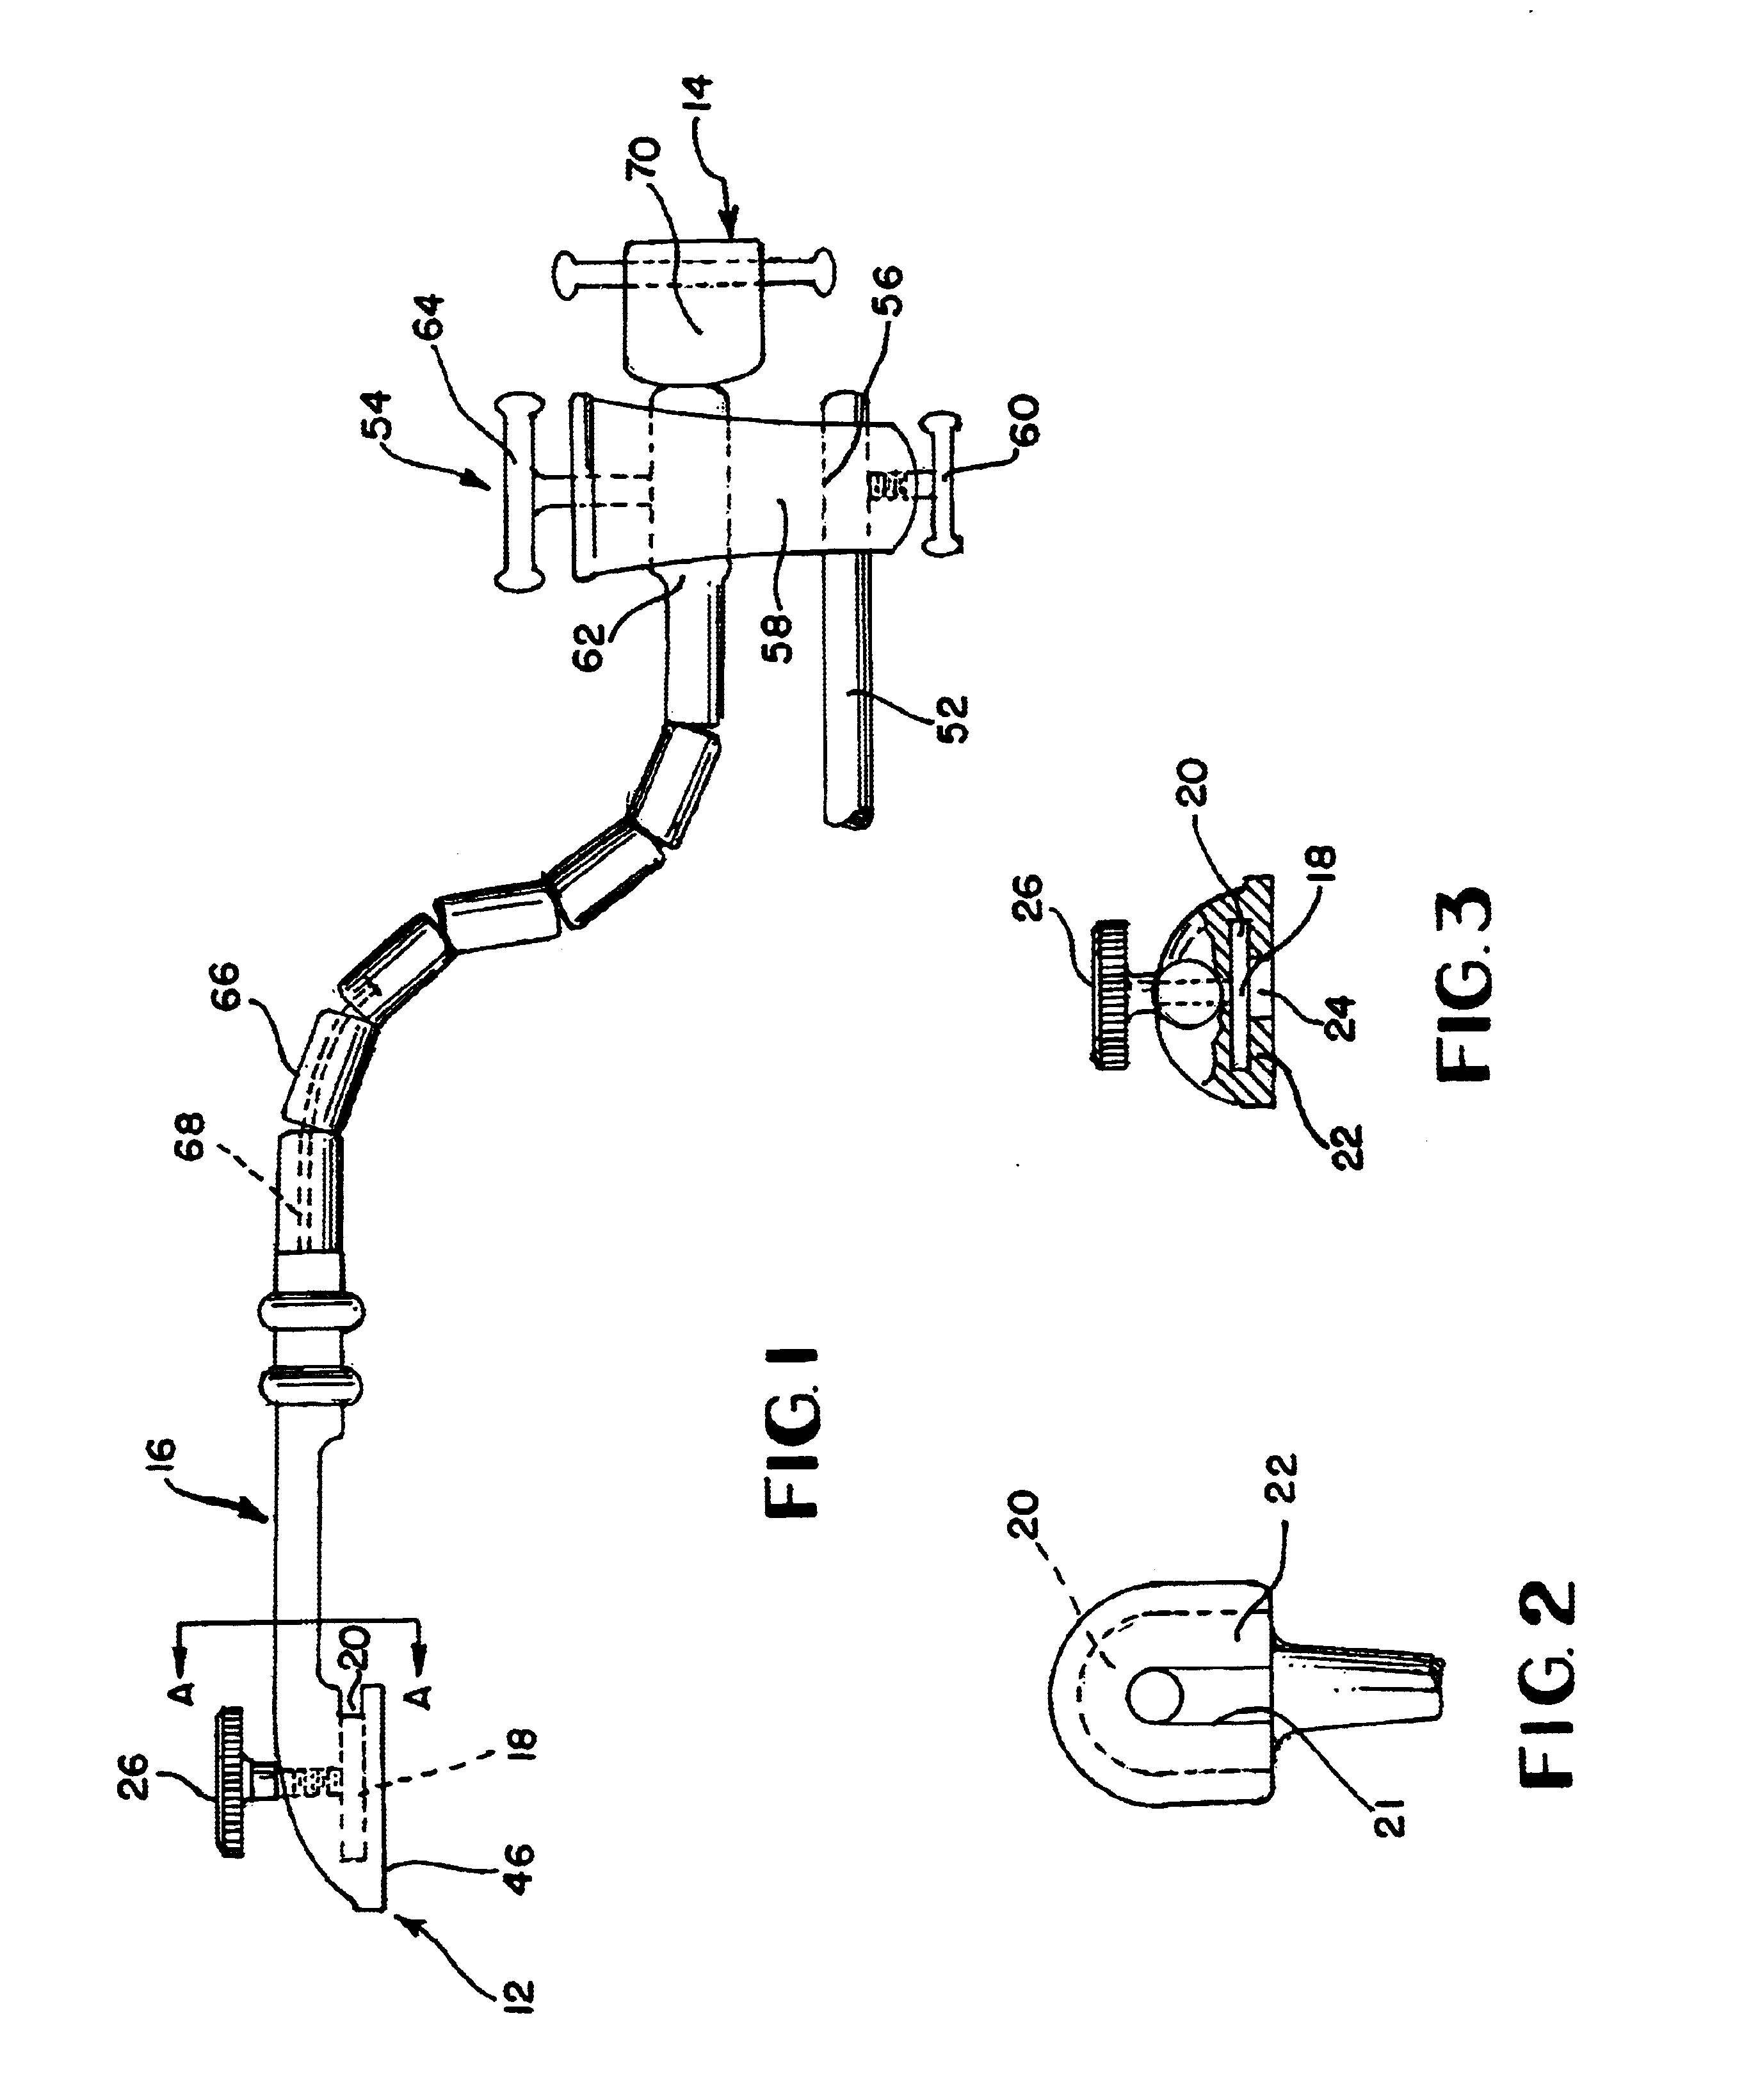 Gooseneck surgical retractor positioner and method of its use